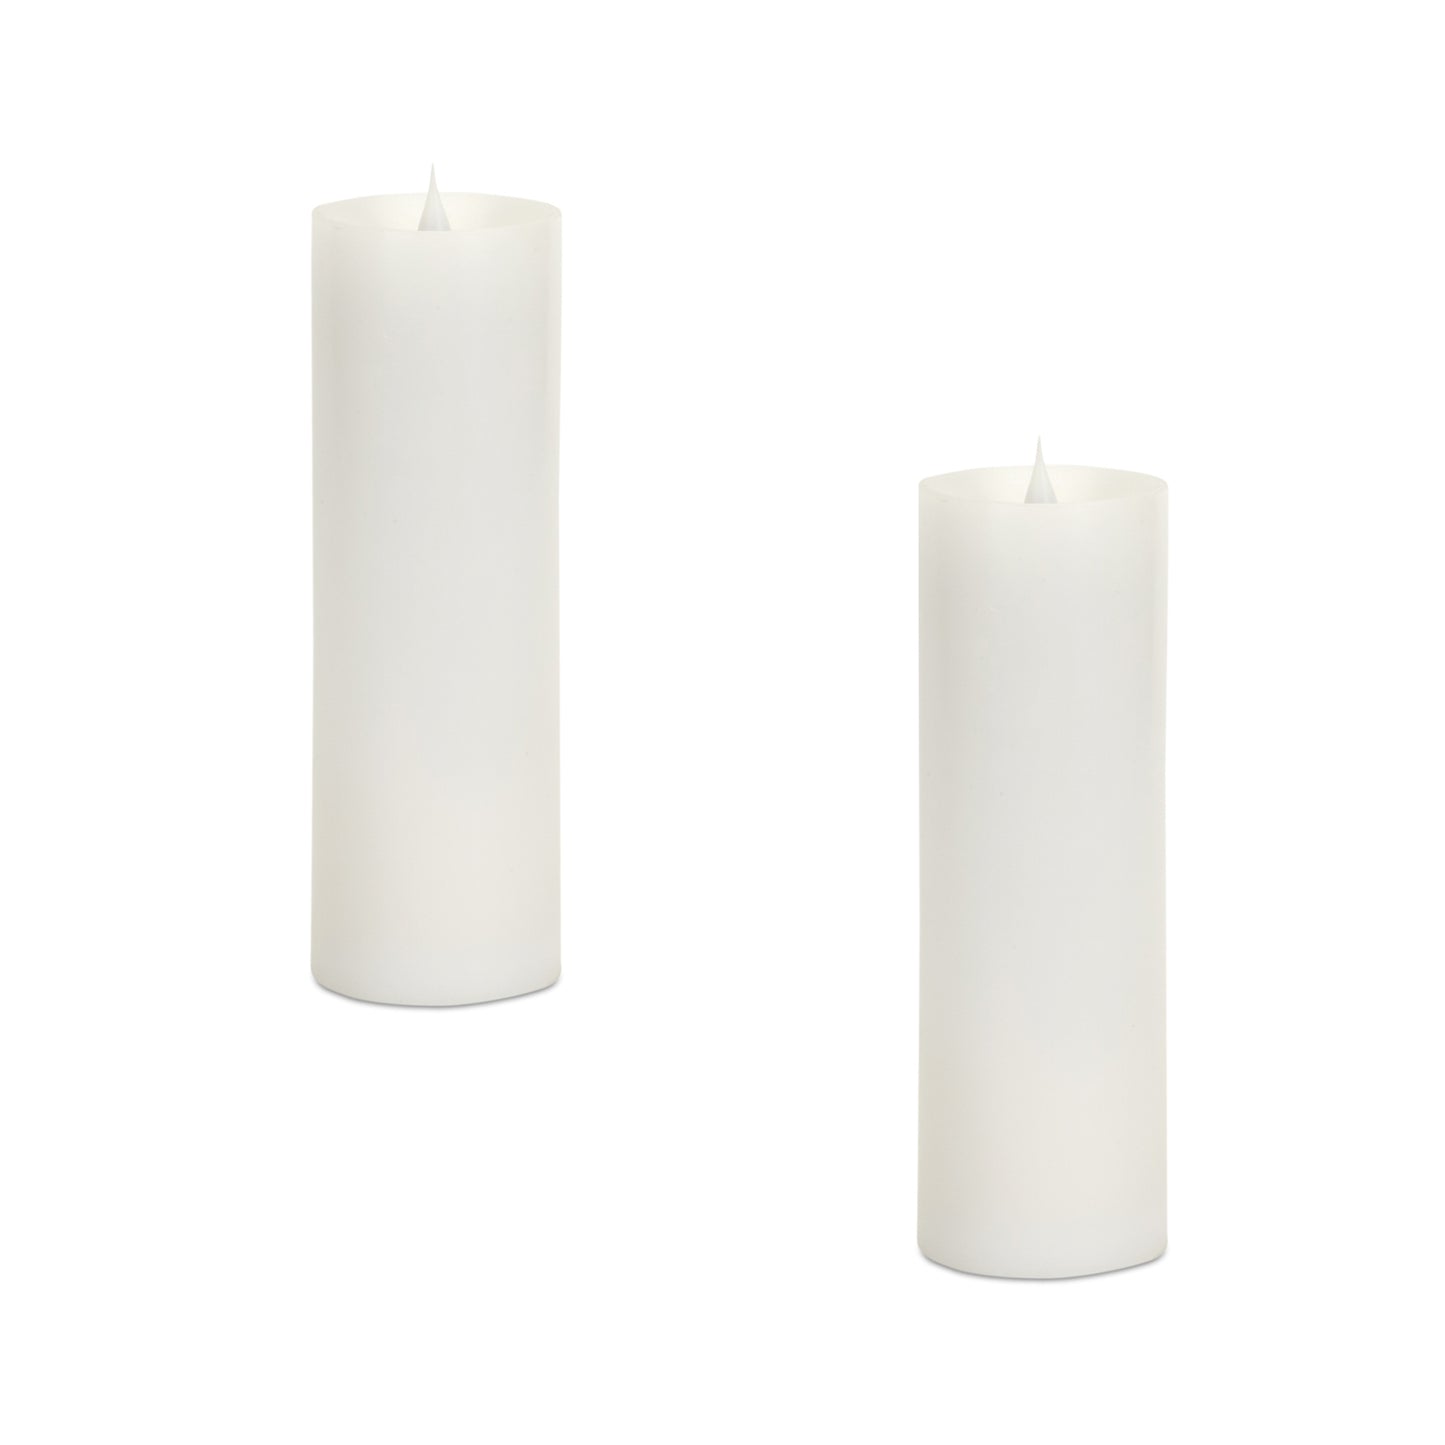 Simplux Designer LED Candle with Moving Flame and Remote (Set of 2)